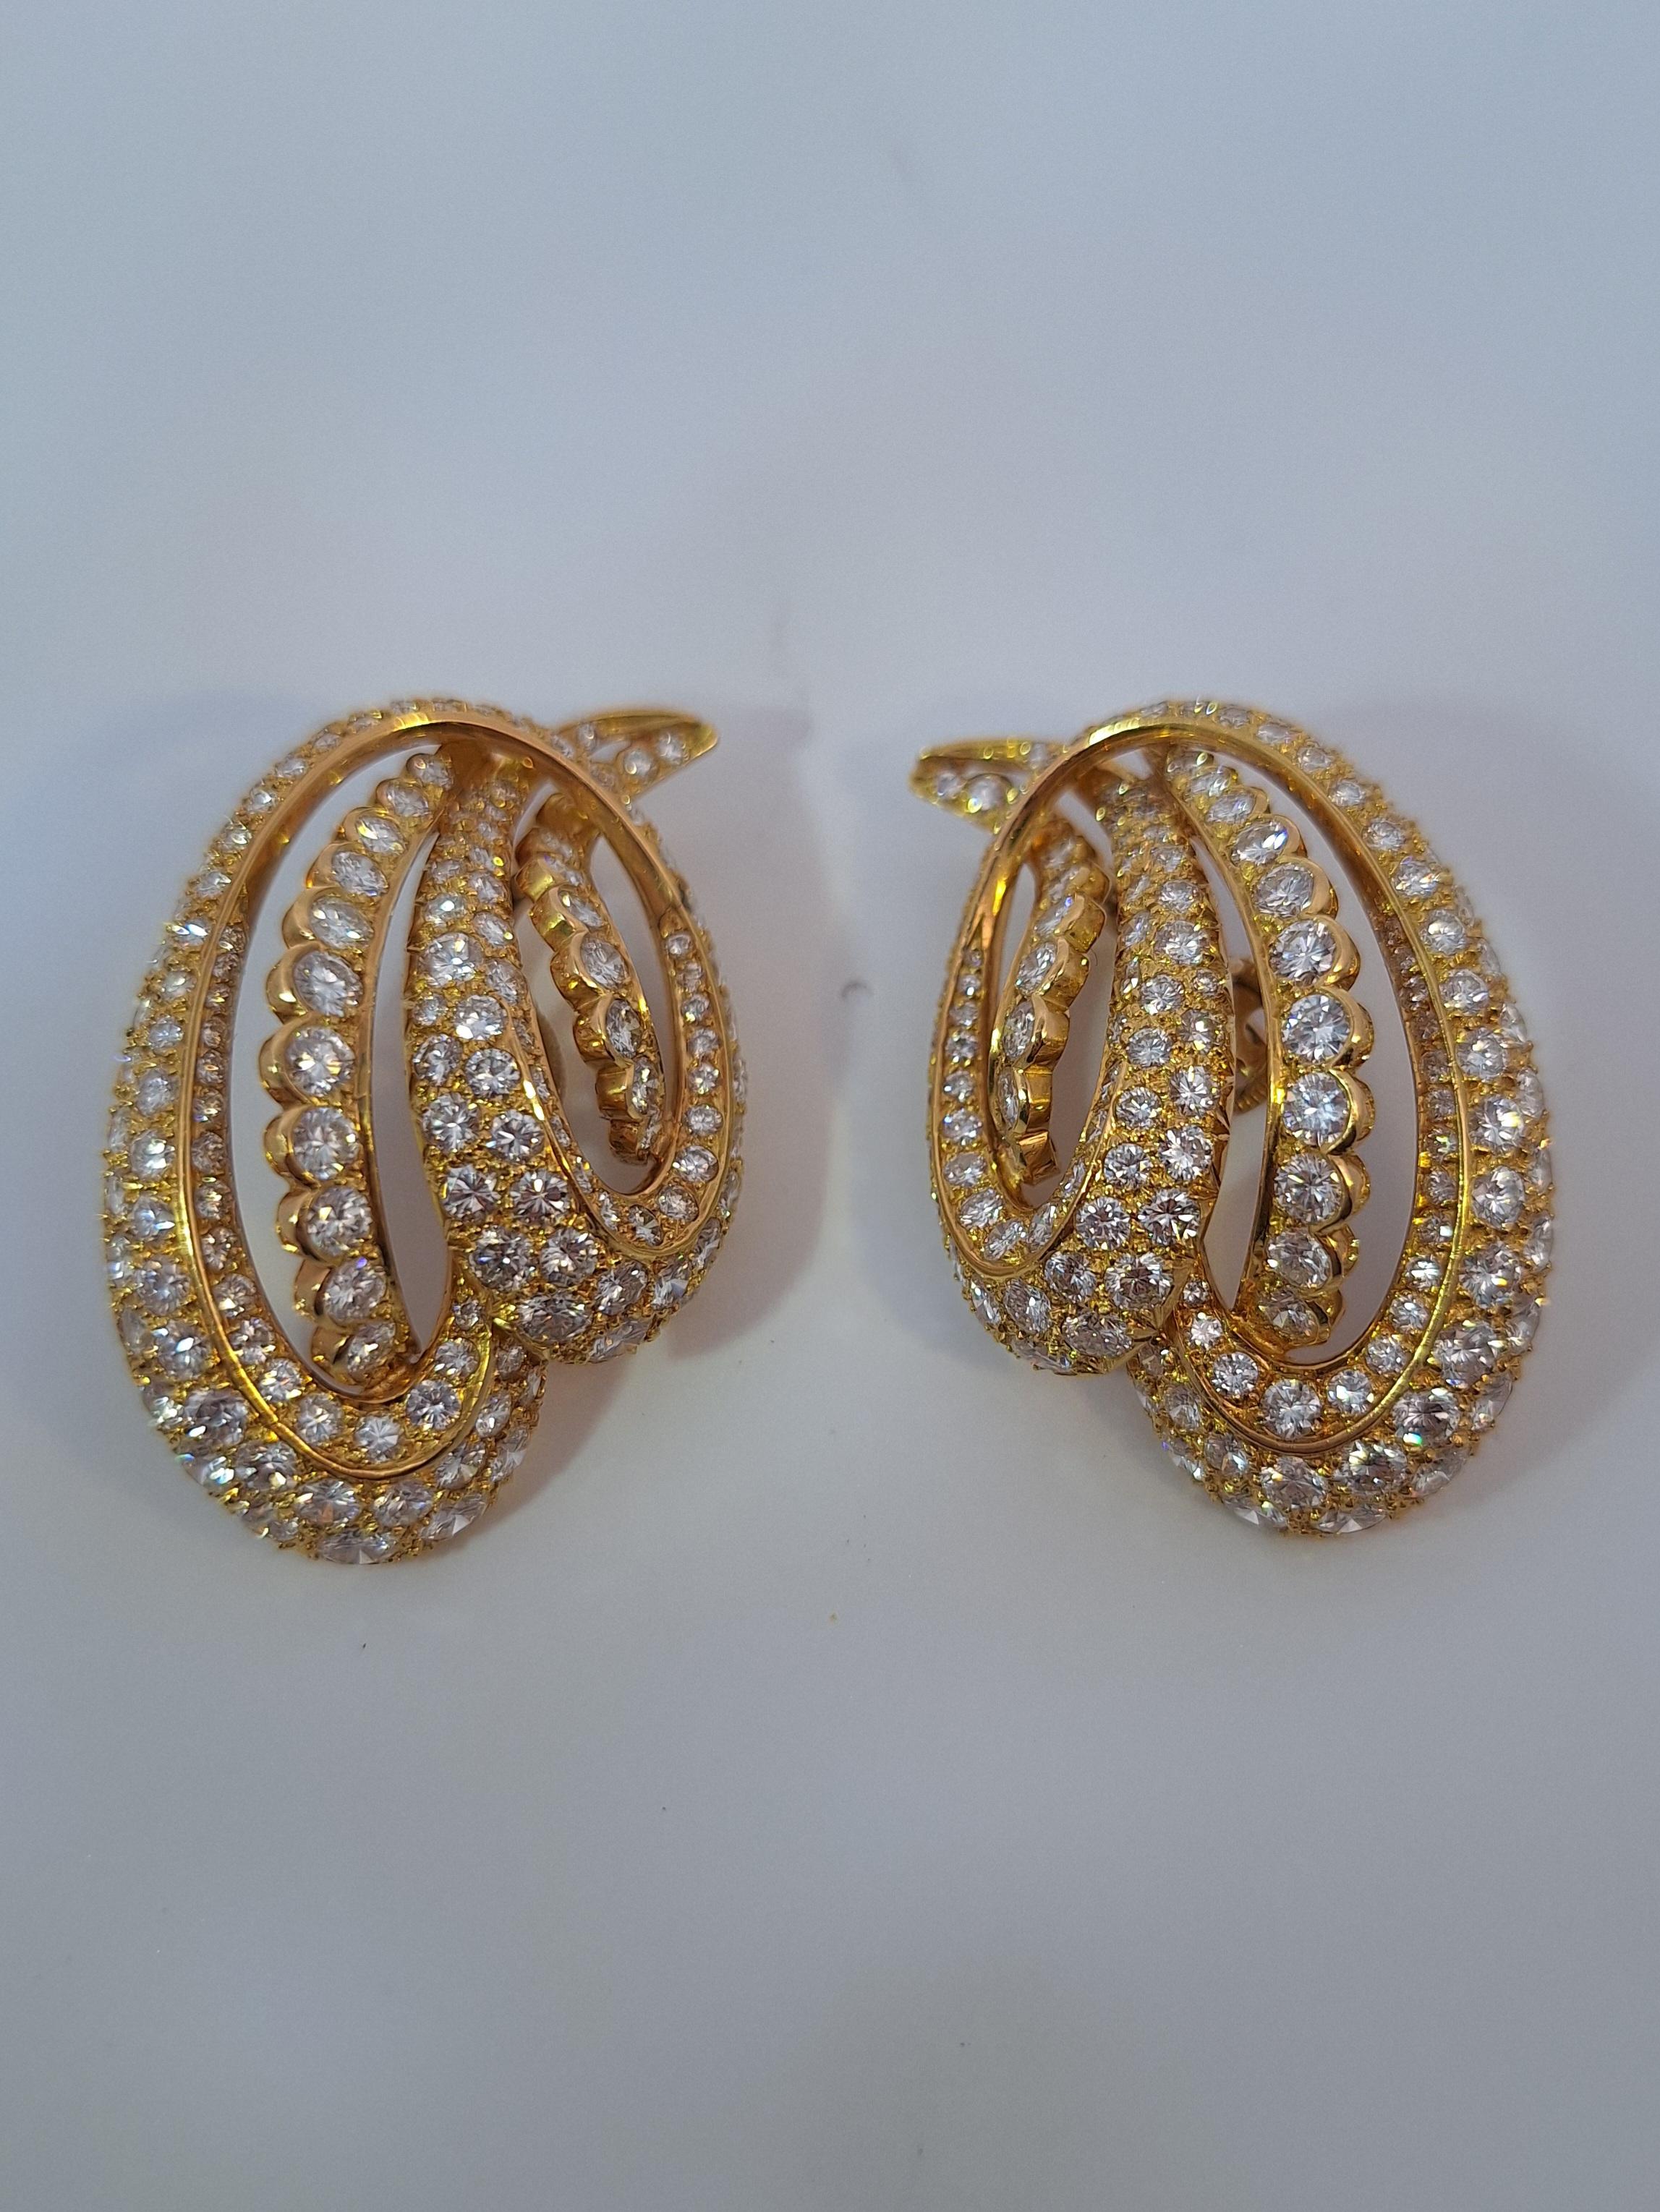 Stone: Pave Set Round Cut Diamonds

Total Carat Weight: Approx. 13.00Ctw

Metal: 18Kt Yellow Gold

Weight: 28 Grams

Video is available upon request